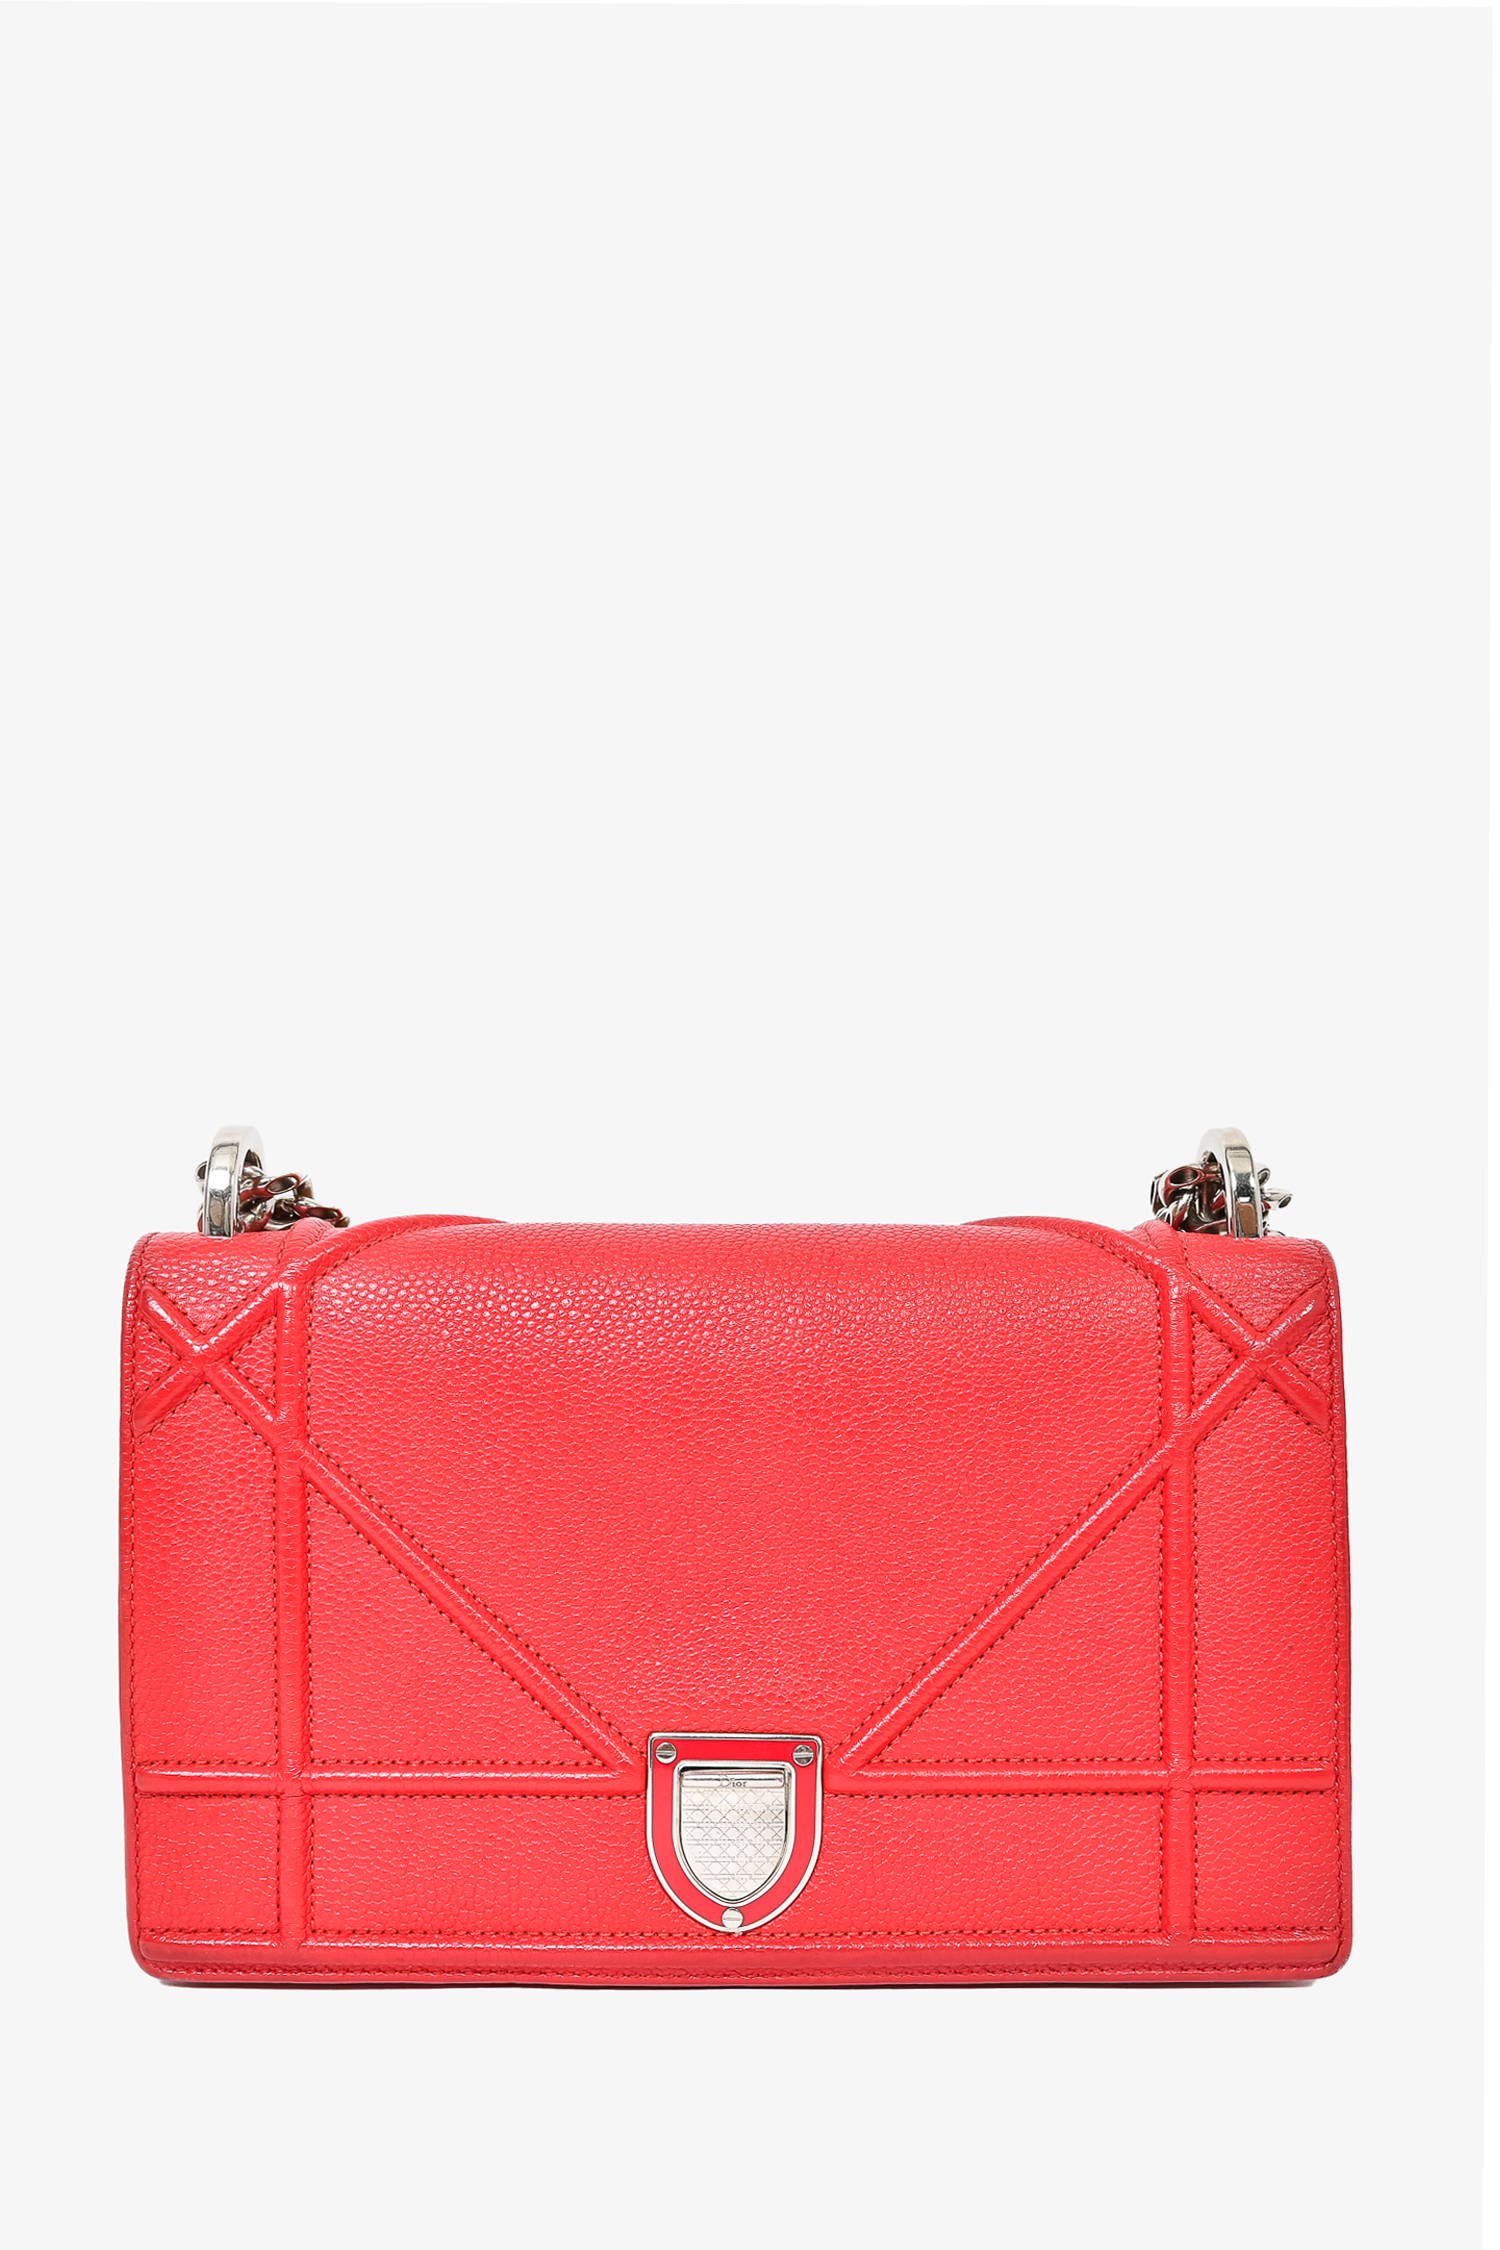 Christian Dior Red Leather 'Small Diorama' Shoulder Bag – Mine & Yours